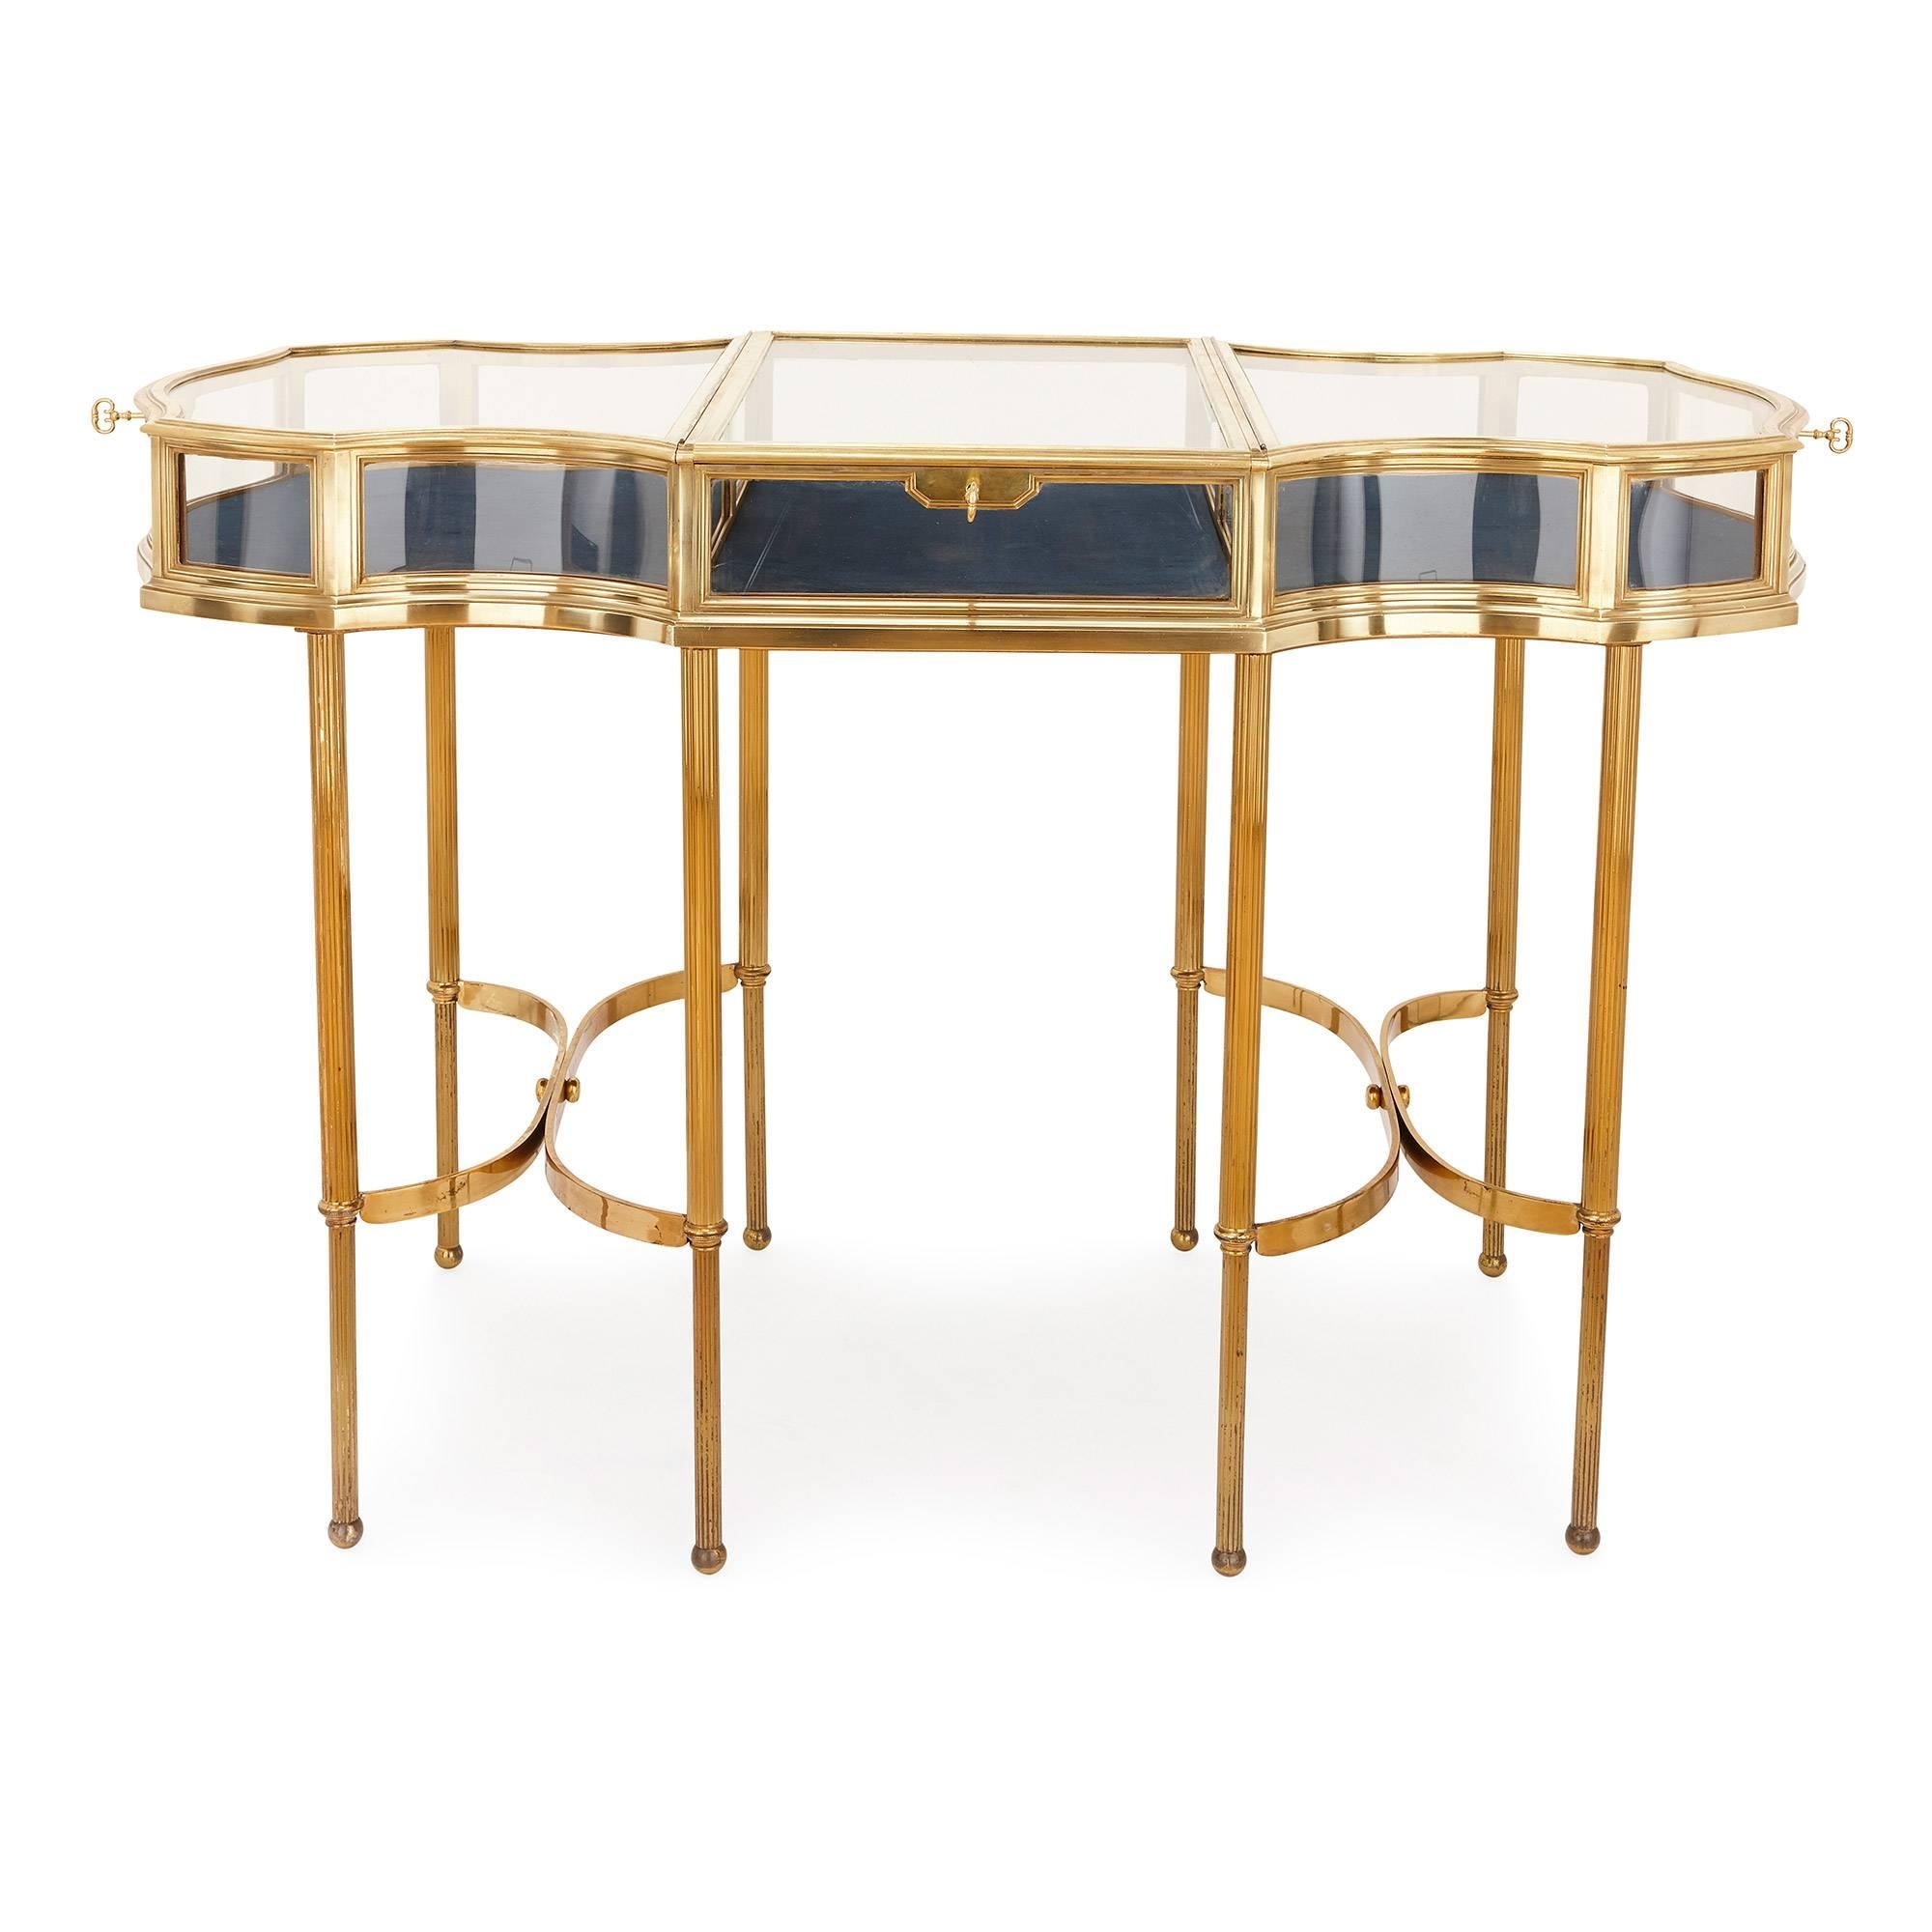 This French vitrine table is a beautifully elegant piece of design, and a true statement piece, perfect for the display of jewelry, trinkets and all manner of precious wares. Its shape is beautifully serpentine, and formed in three sections, each of